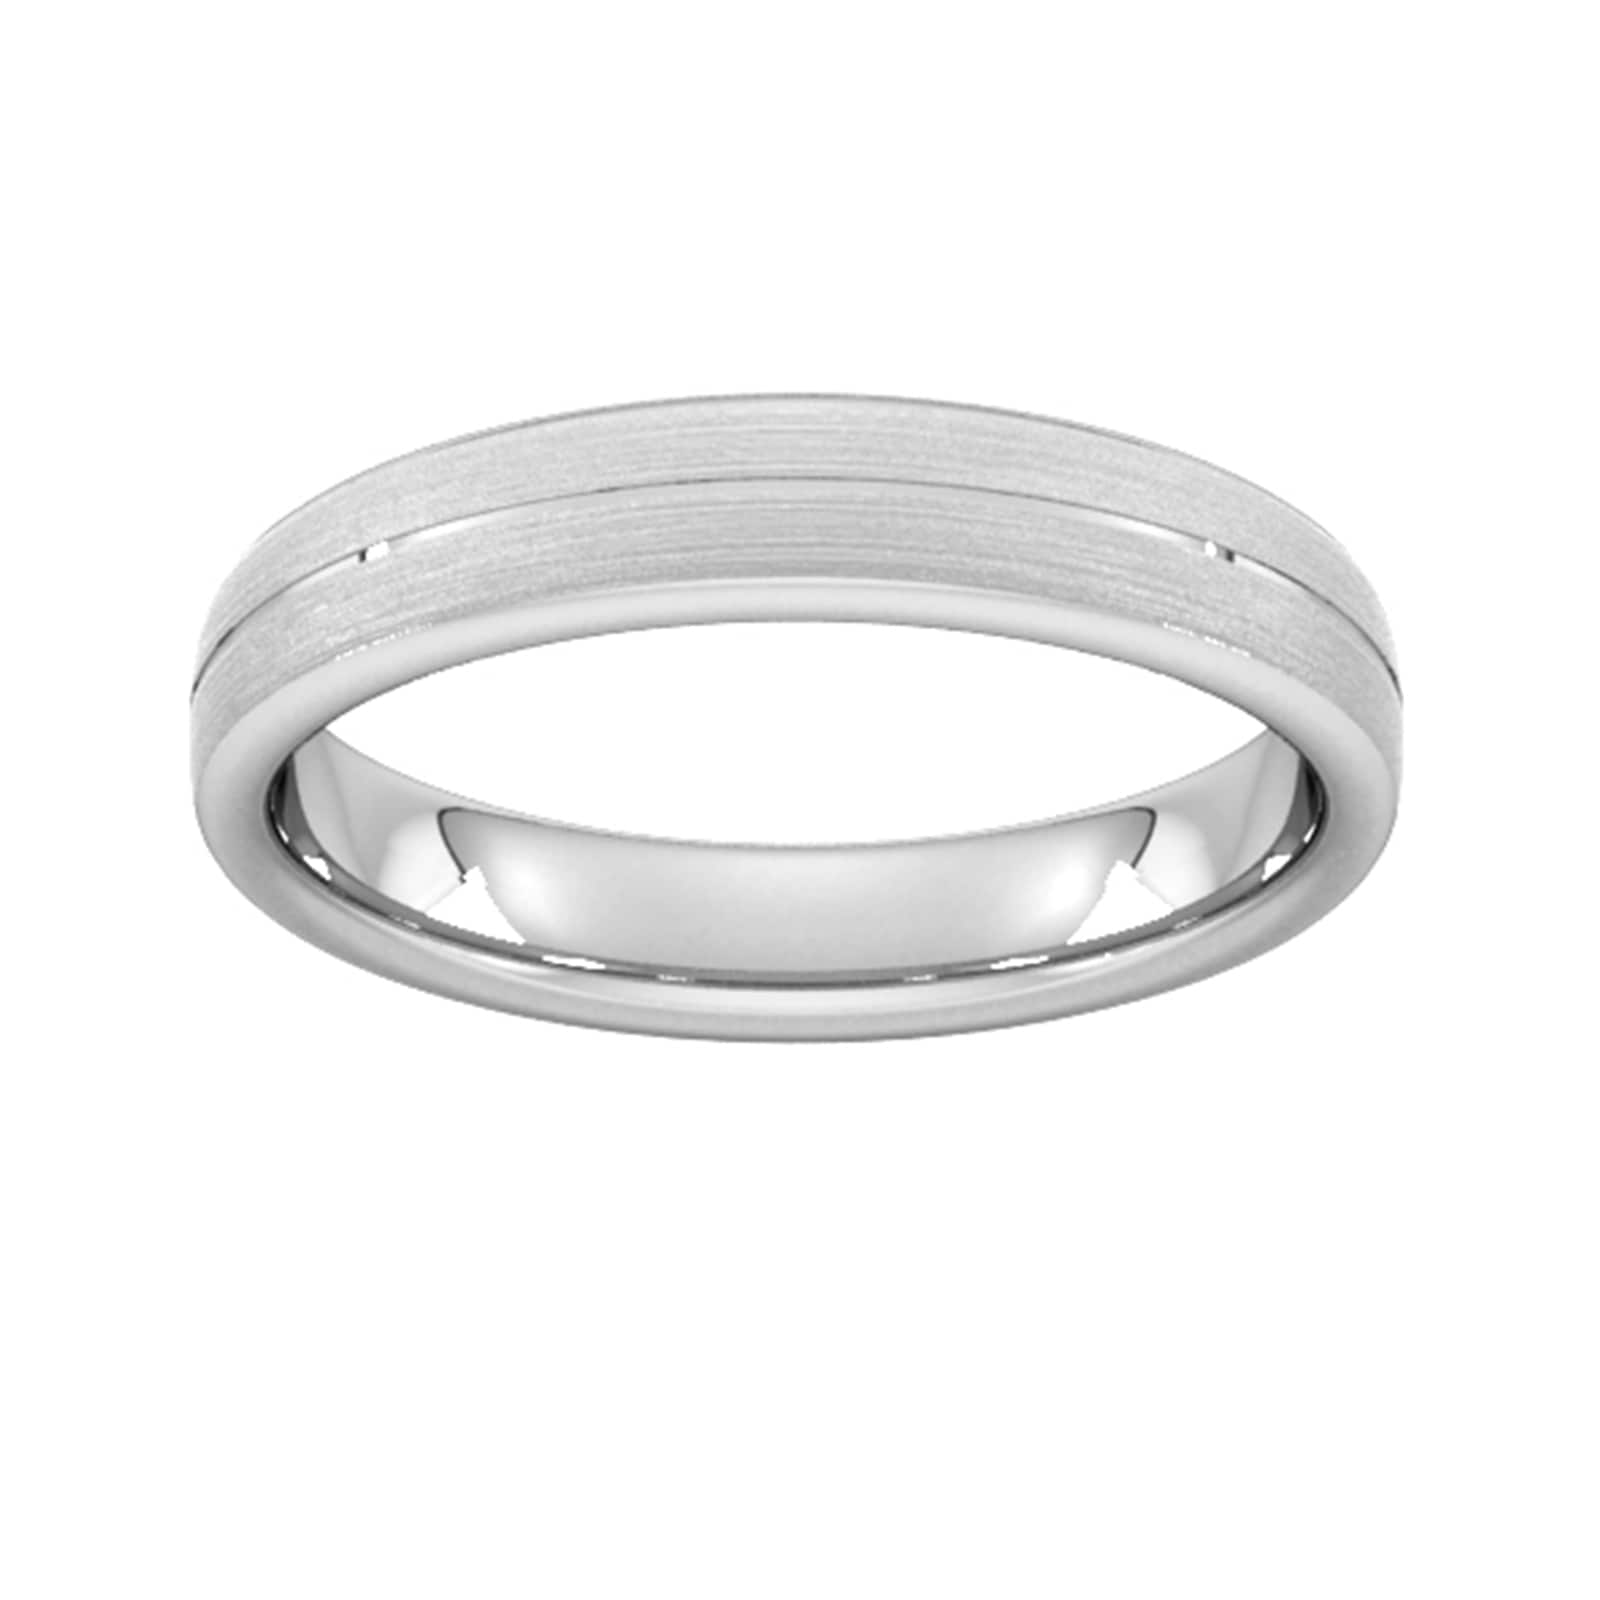 4mm Slight Court Extra Heavy Centre Groove With Chamfered Edge Wedding Ring In 18 Carat White Gold - Ring Size S